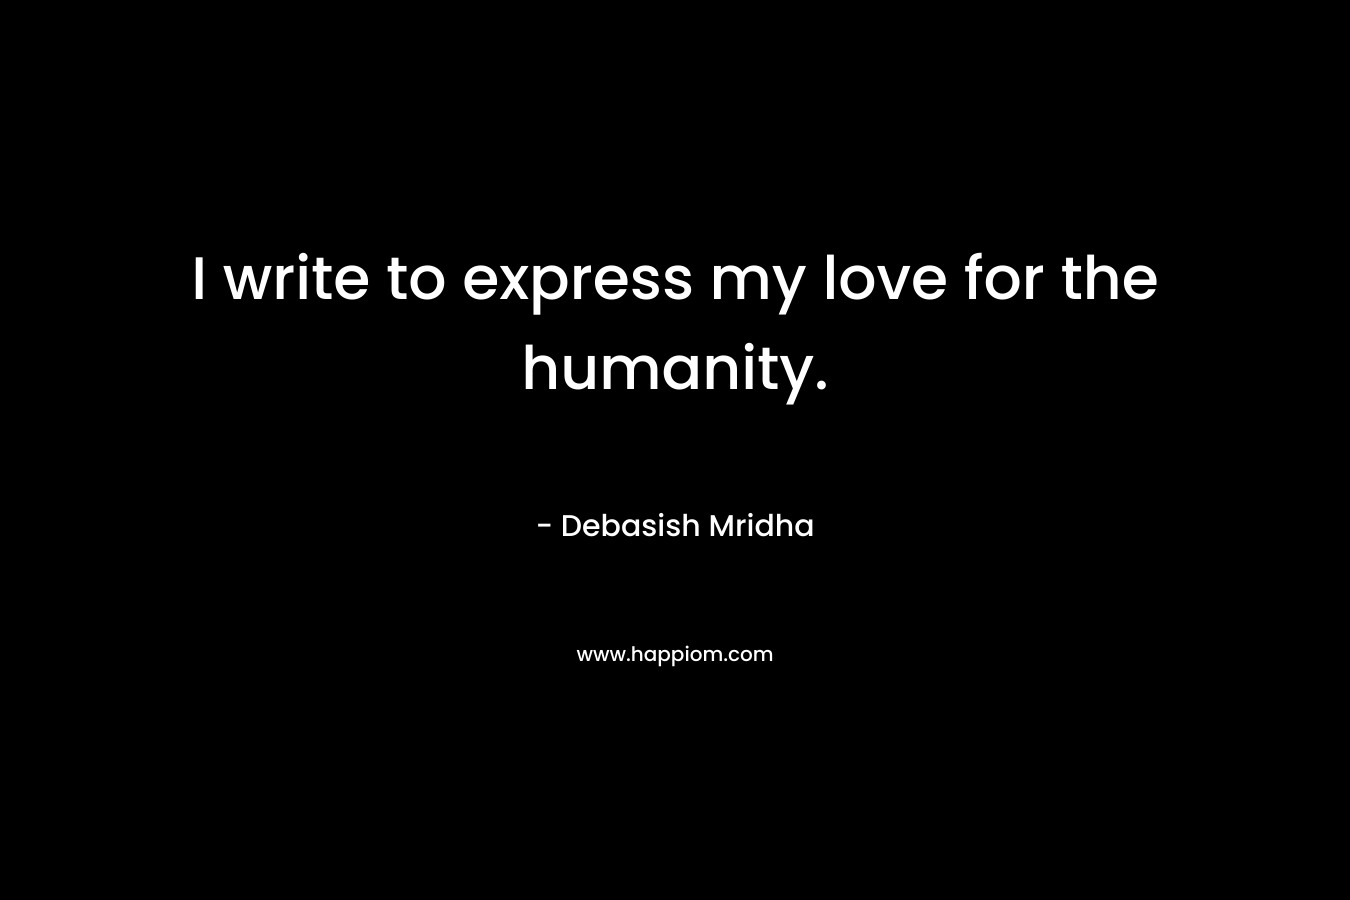 I write to express my love for the humanity.